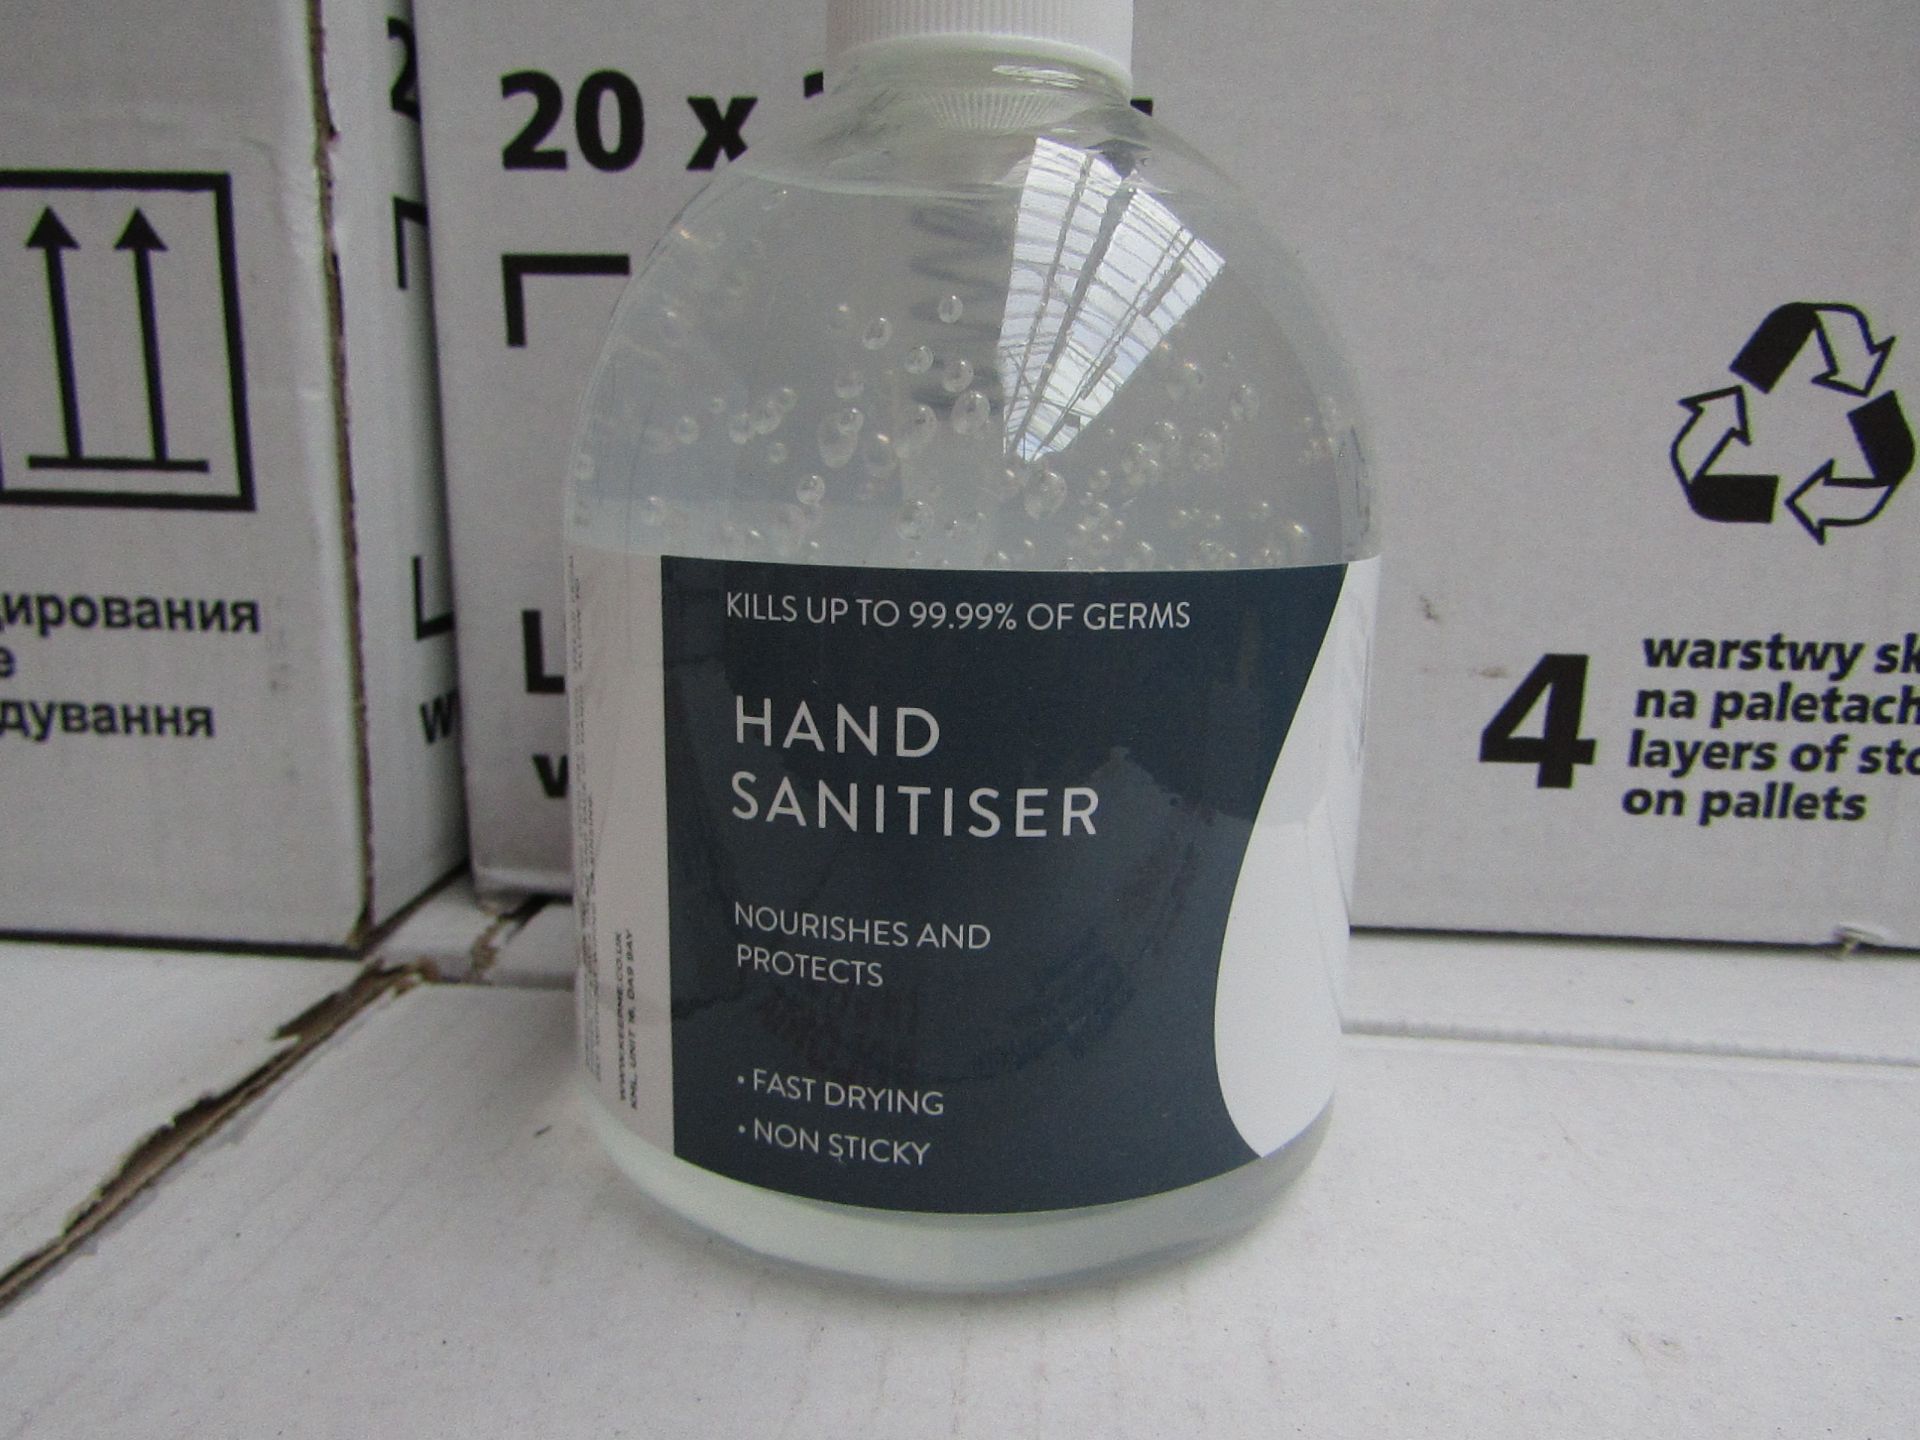 1x Hand Sanitier (500ml) - Kills Up to 99.9% of Germs - New.